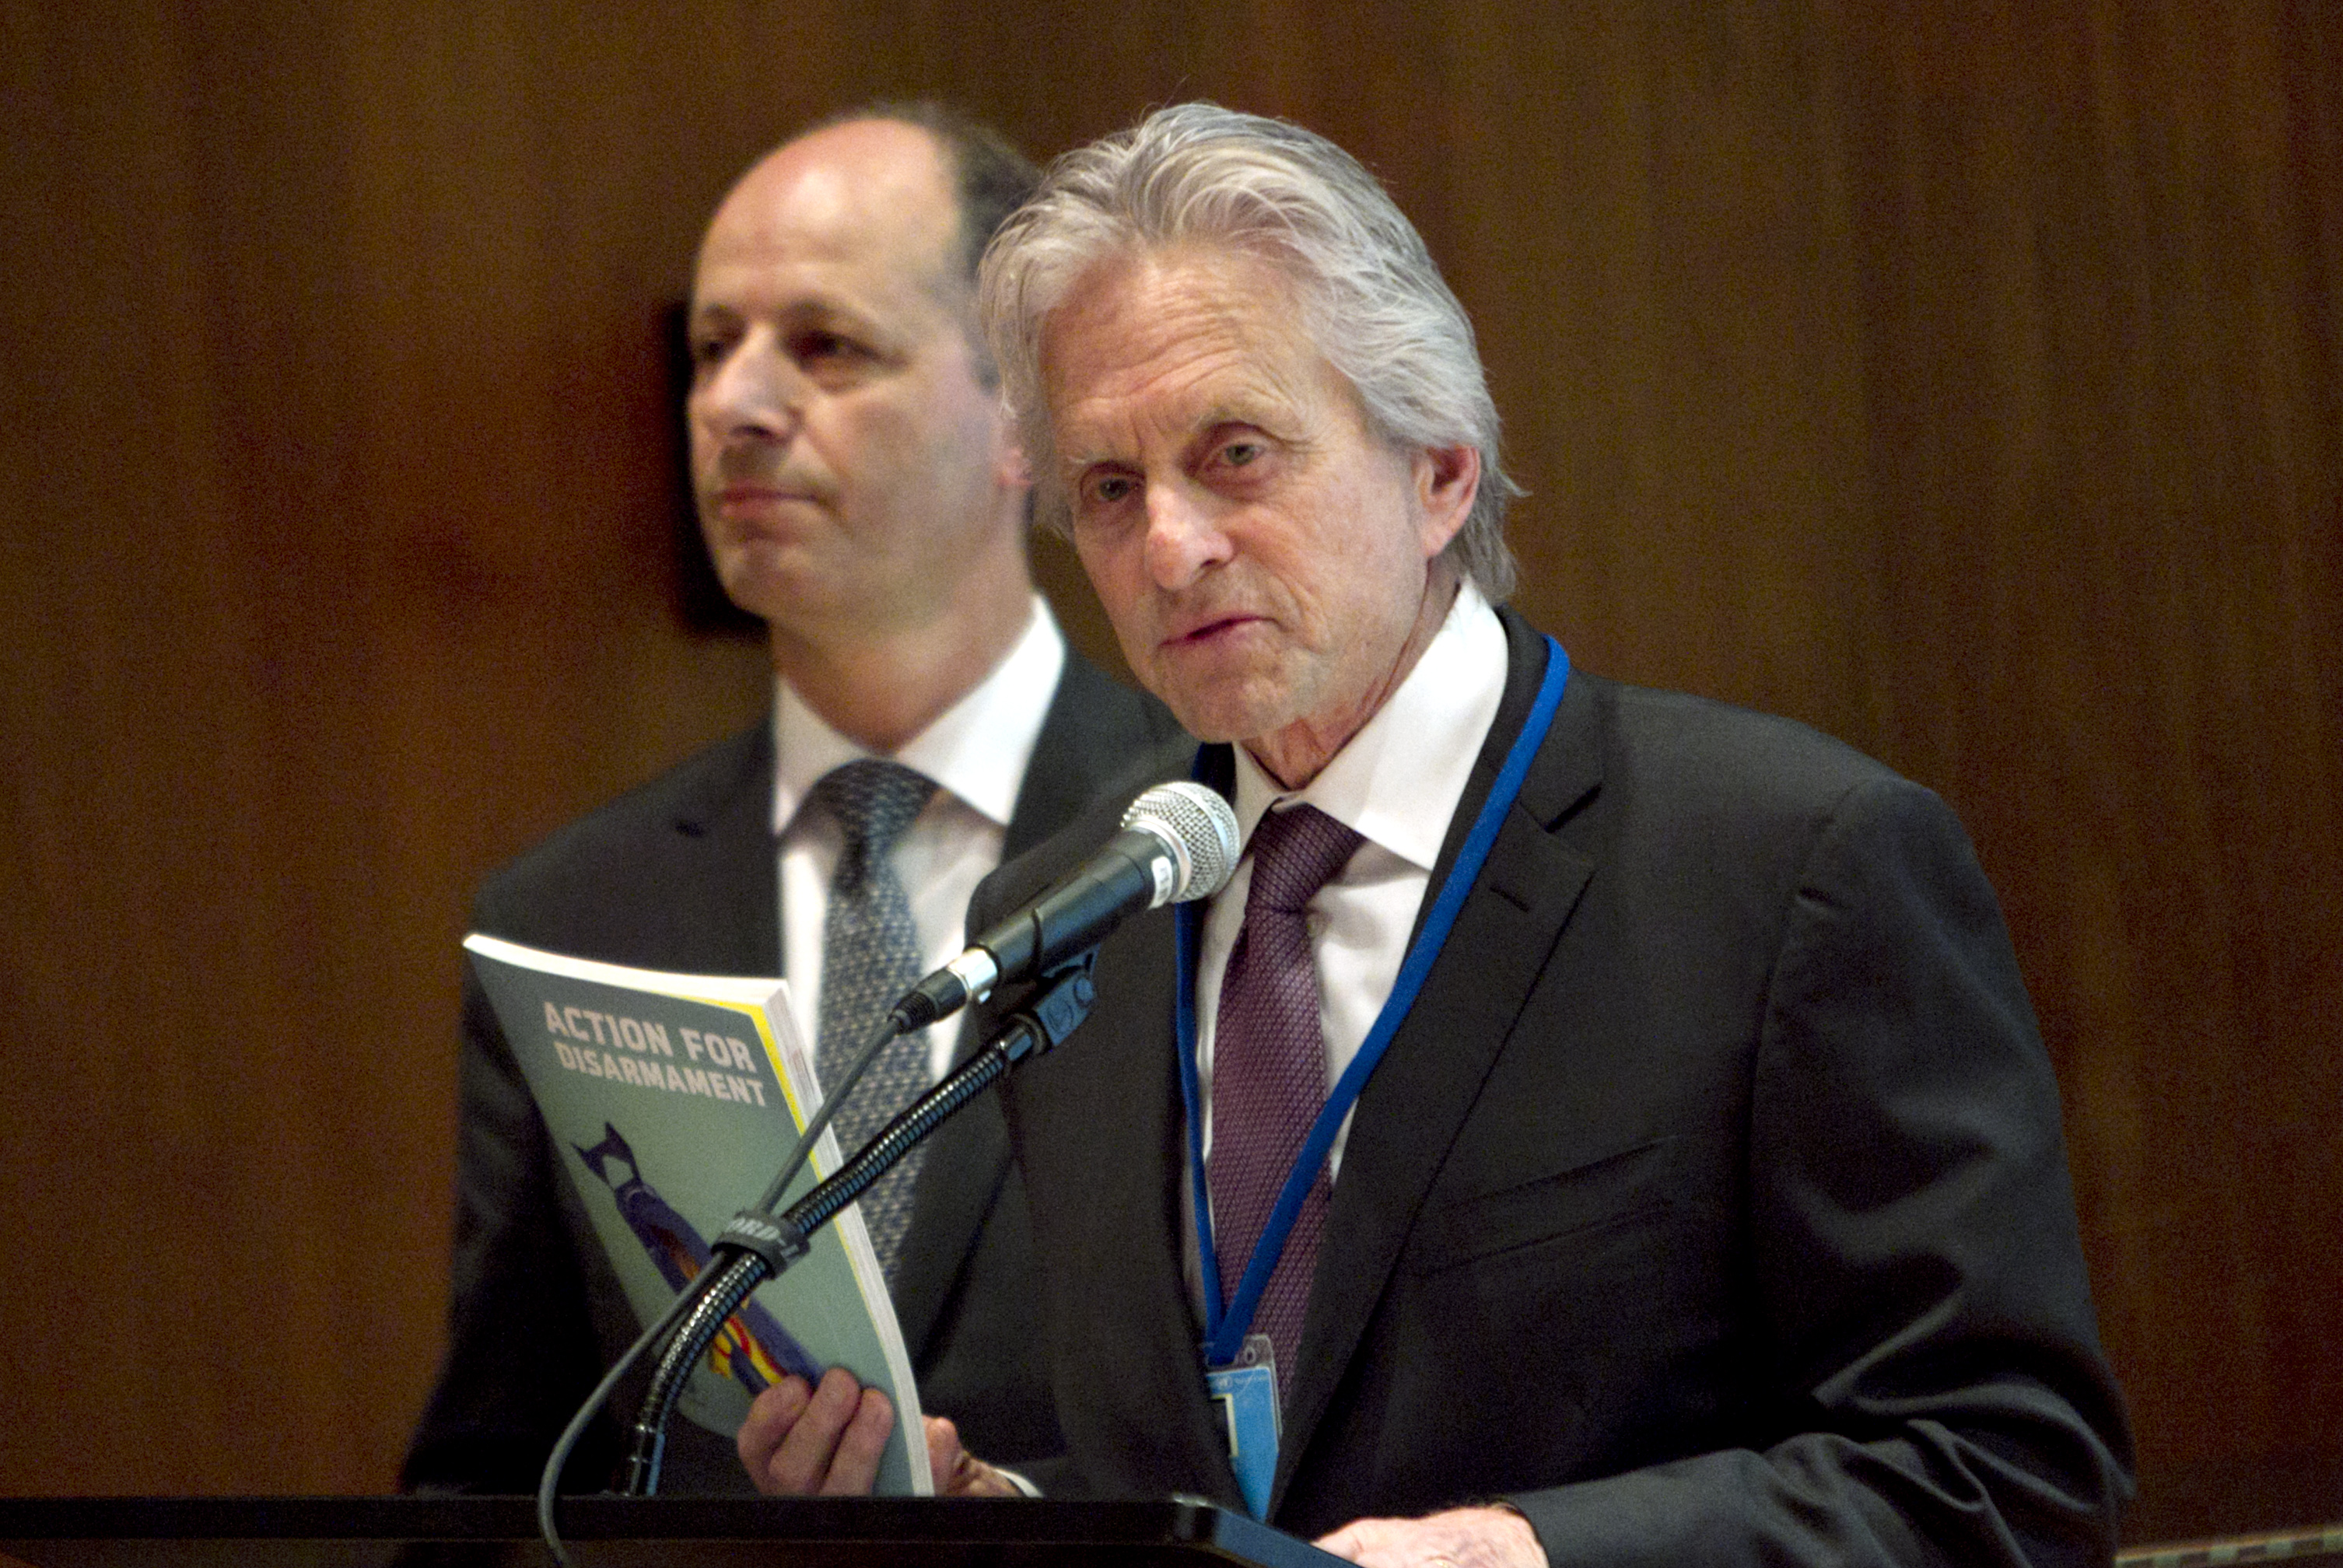 UN Messenger of Peace Michael Douglas speaks during a special event at UN headquarters to launch a book entitled, “Action for Disarmament: 10 Things You Can Do!”/UN Photo/Devra Berkowitz